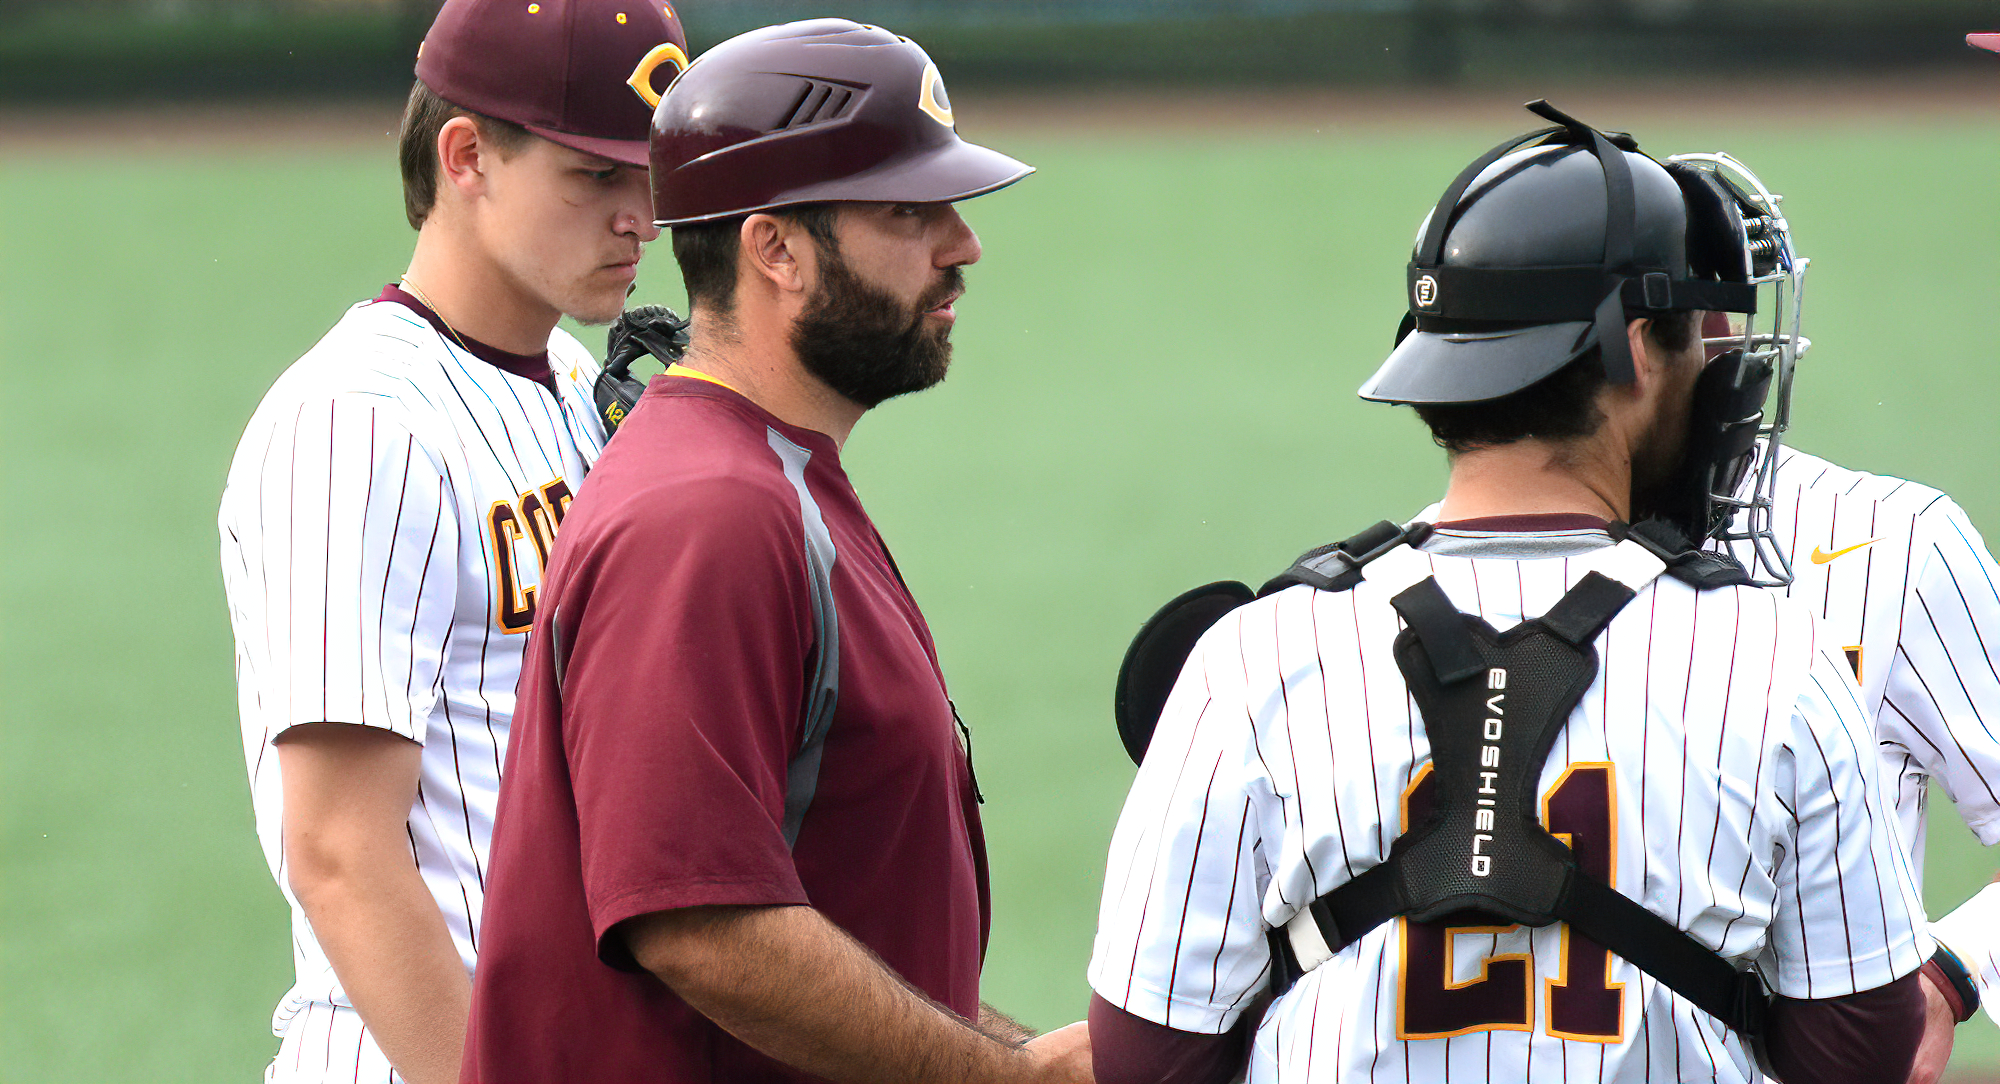 Concordia knocked out 13 hits and scored 13 runs in a 13-7 win over Calvin (Mich.). The victory was the first college win for head coach Anthony Renz.